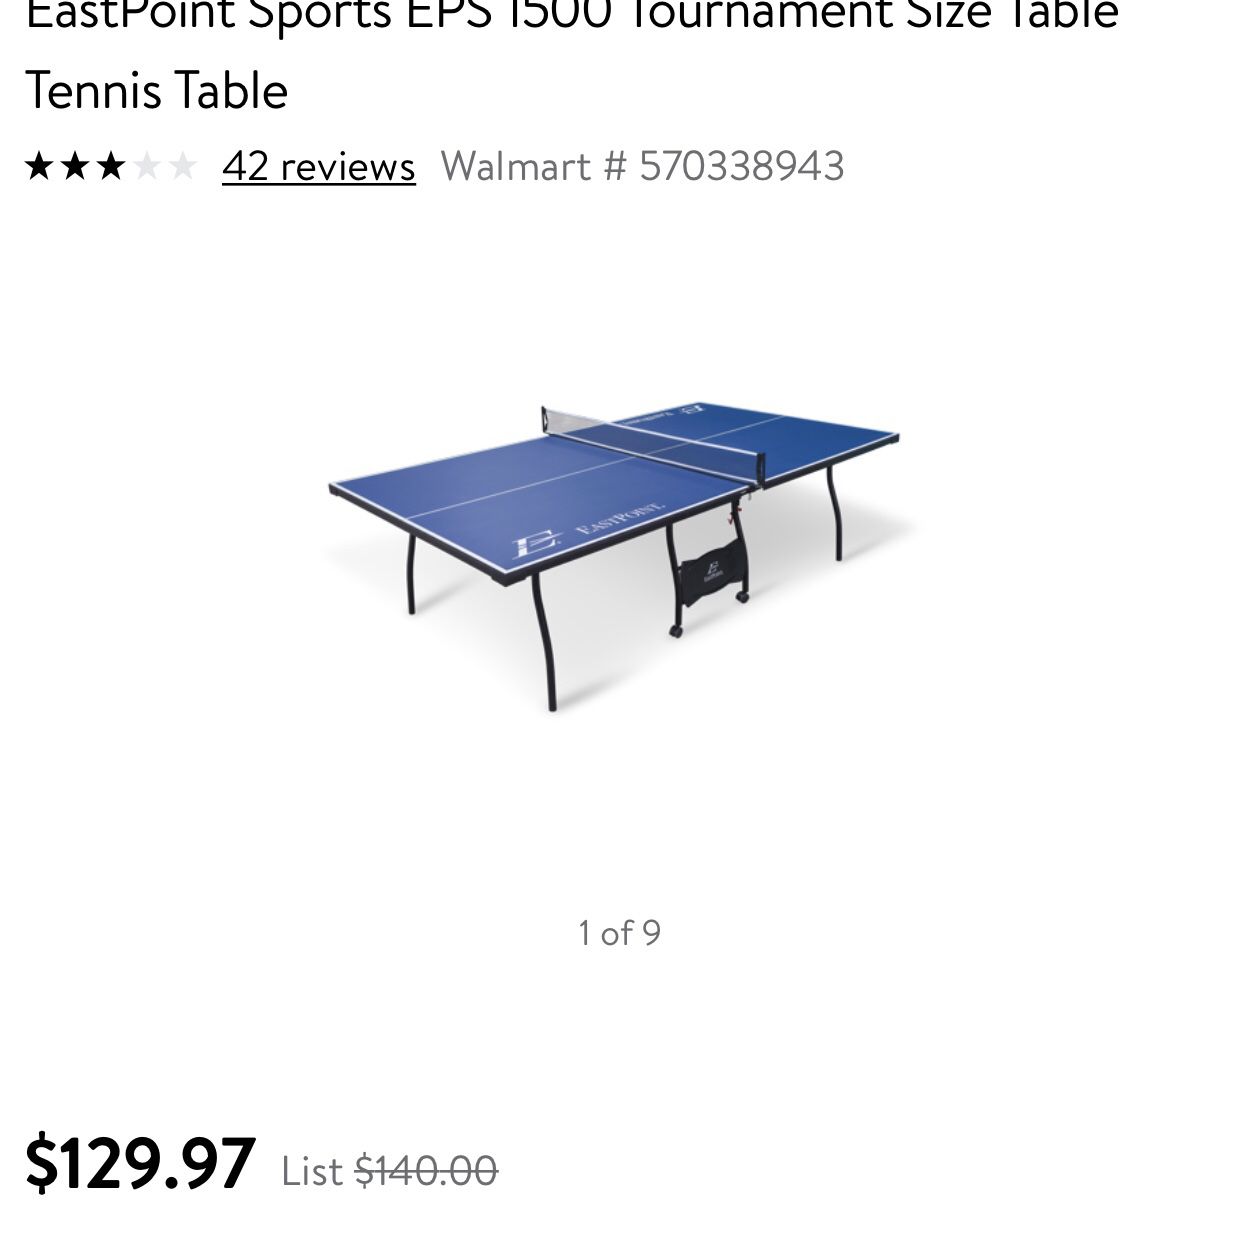 Ping pong table EPS 1500 Brand new in box never used